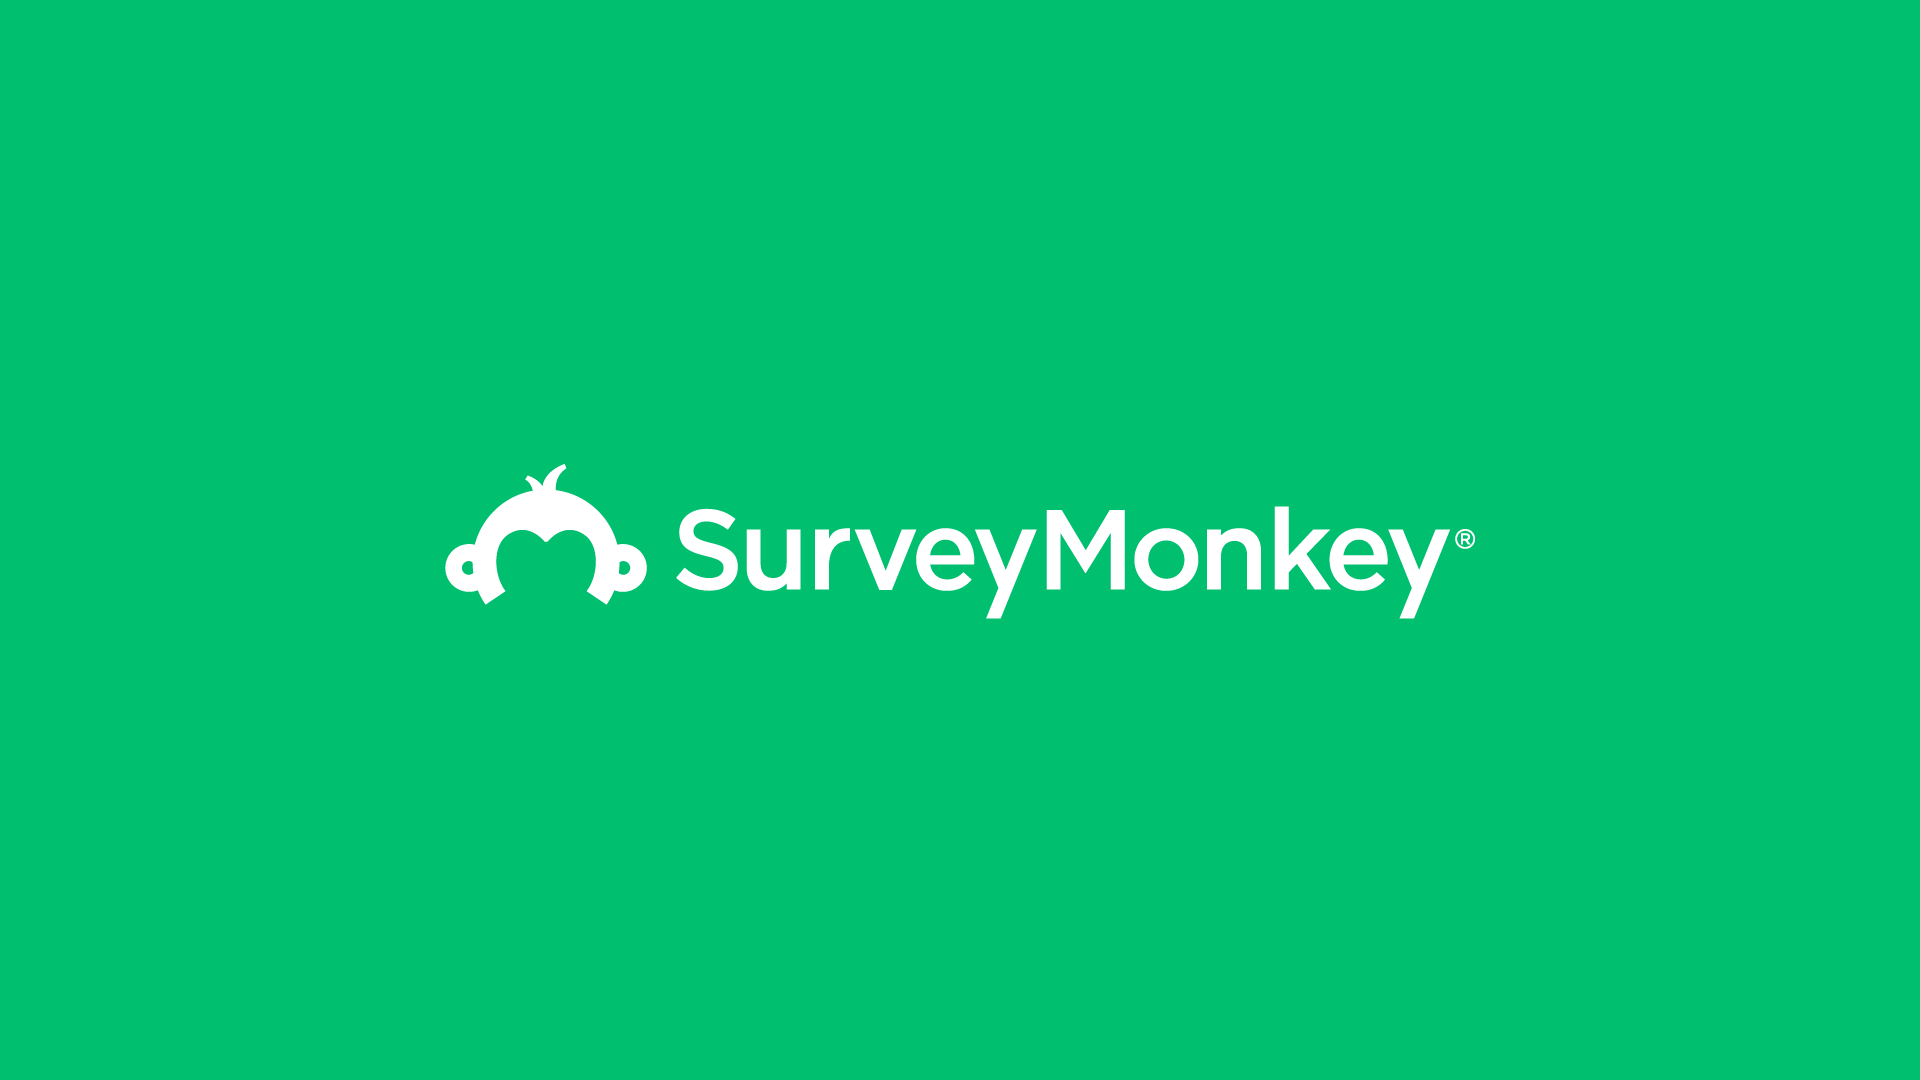 Surveymonkey Ipo What To Make Of It By - learn more about roblox before ipo